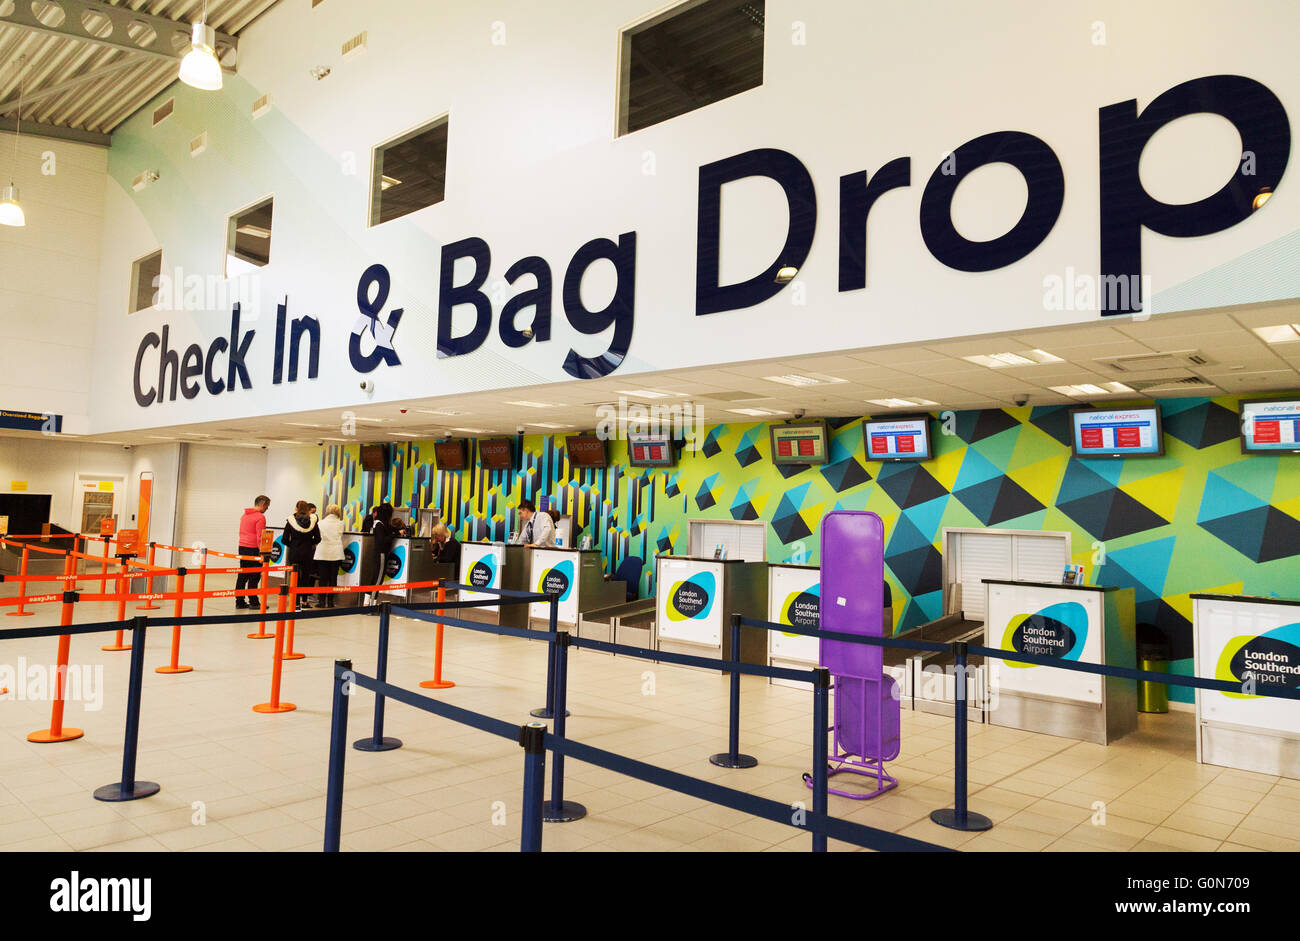 Check in and Bag drop, London Southend airport terminal interior, Southend, Essex UK Stock Photo